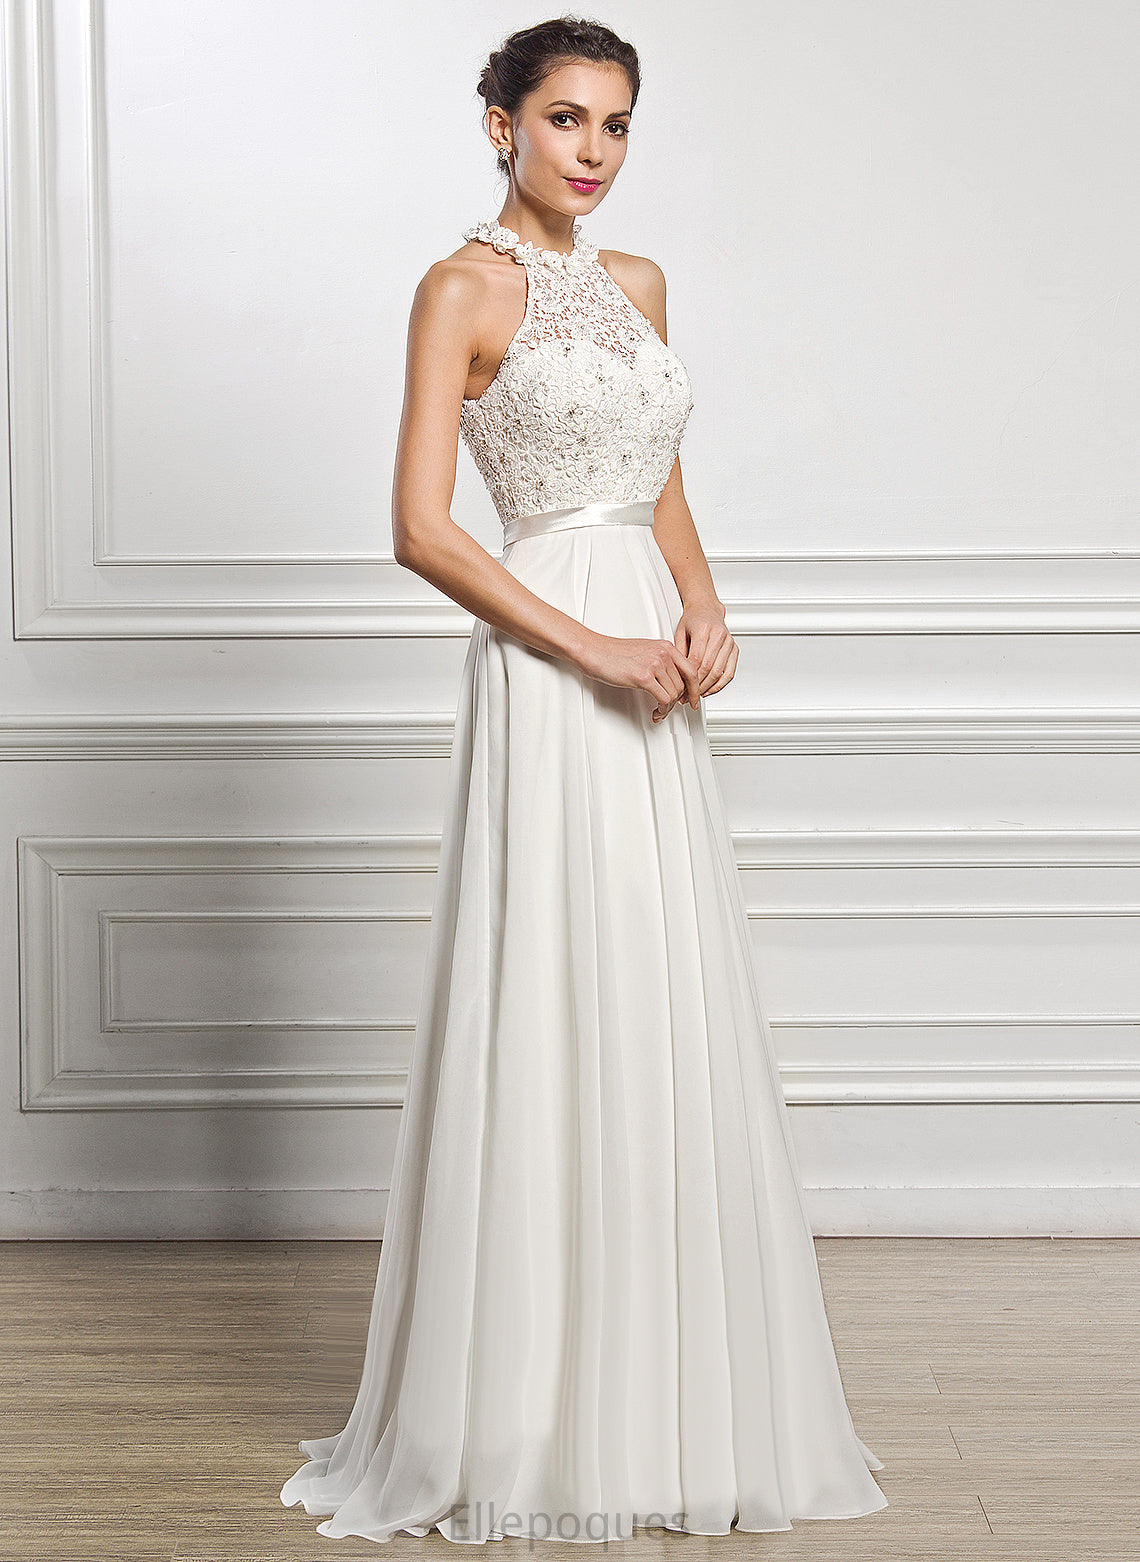 Wedding Floor-Length Wedding Dresses Chiffon A-Line Dress Lace With Angel Beading Sequins